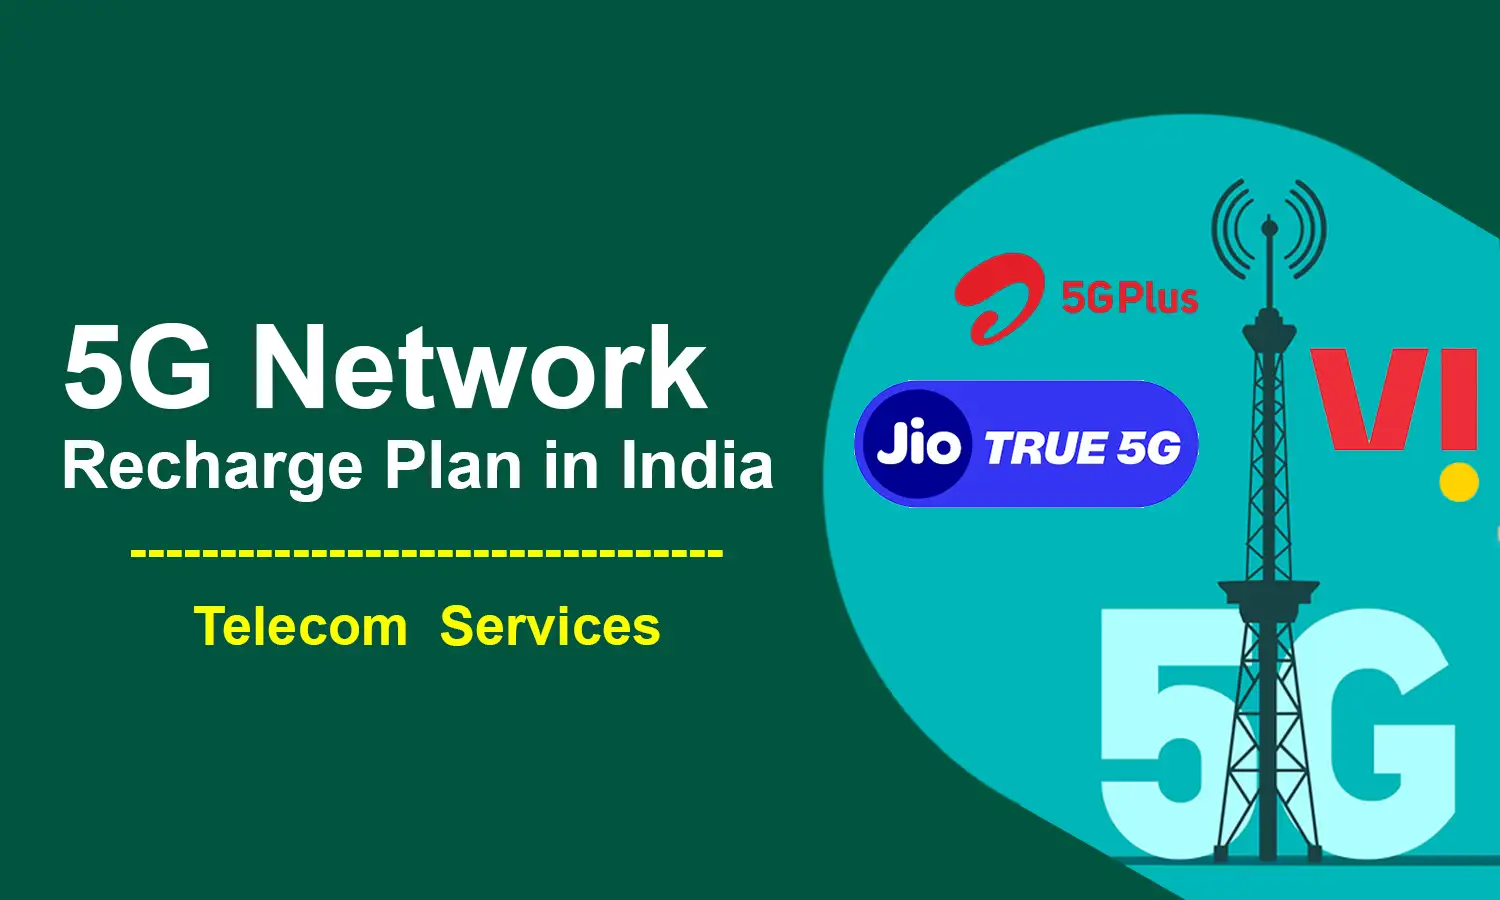 5G Recharge Plan in India